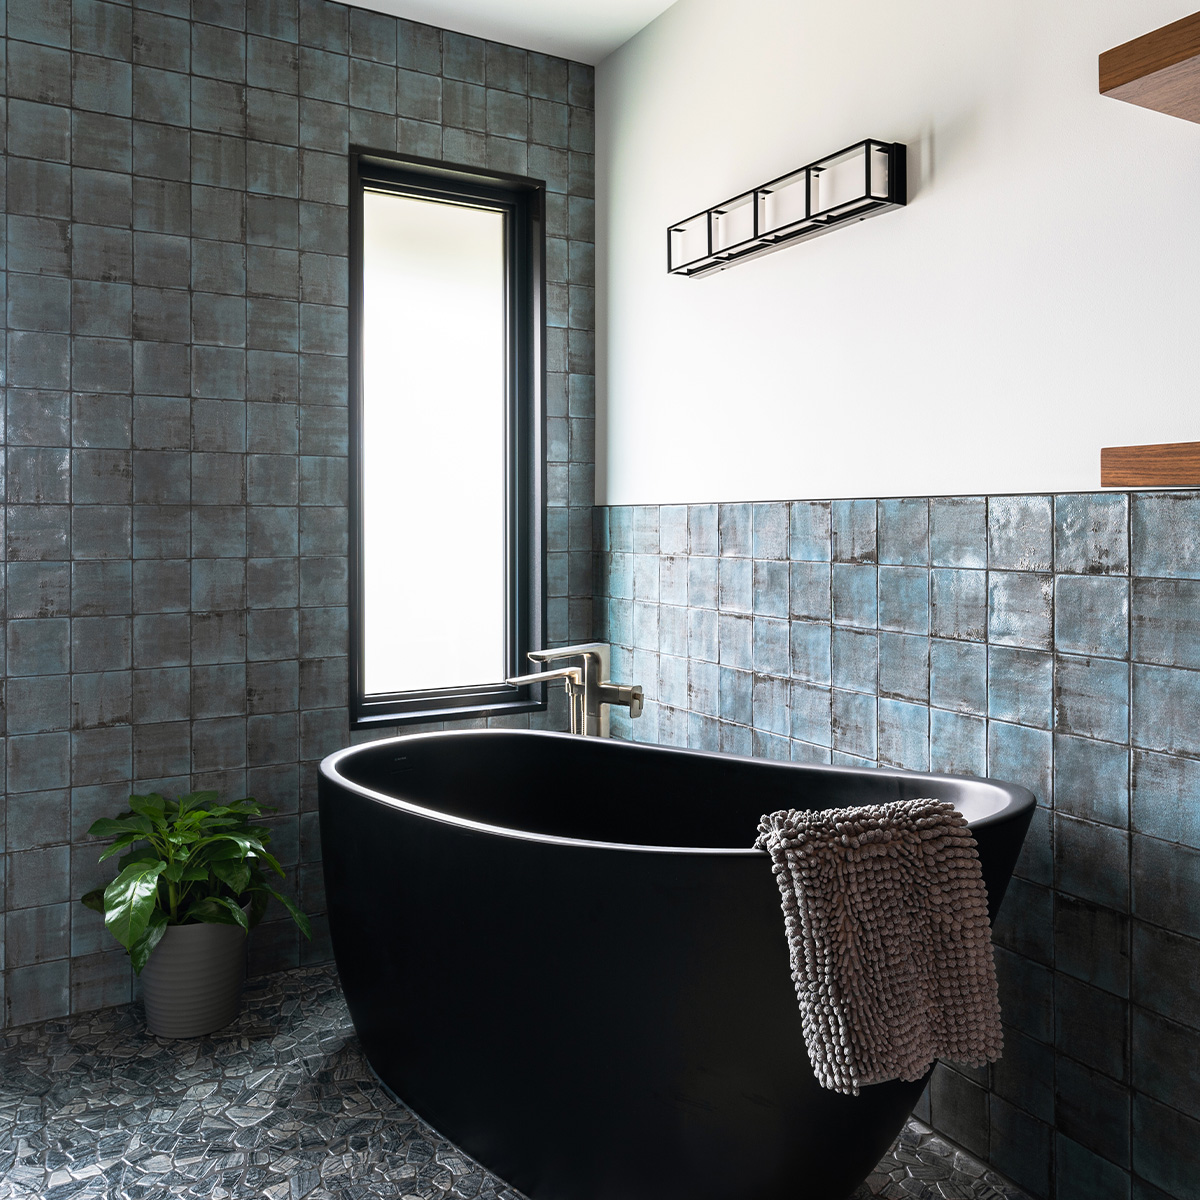 A sleek bathroom with a black bathtub and a window, offering a perfect blend of style and natural light.